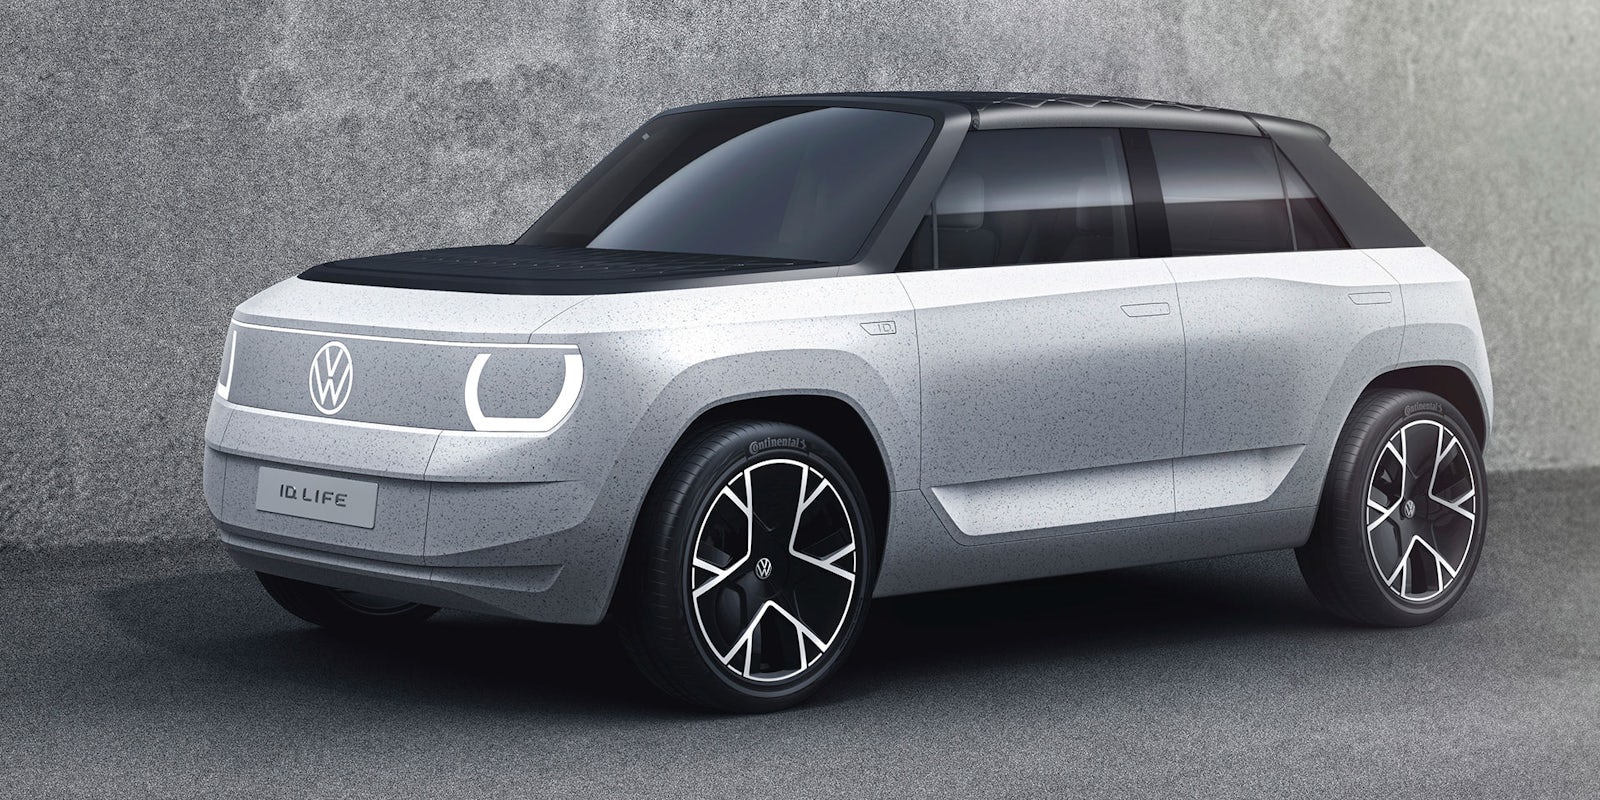 The best new Volkswagen models coming by 2025: all you need to